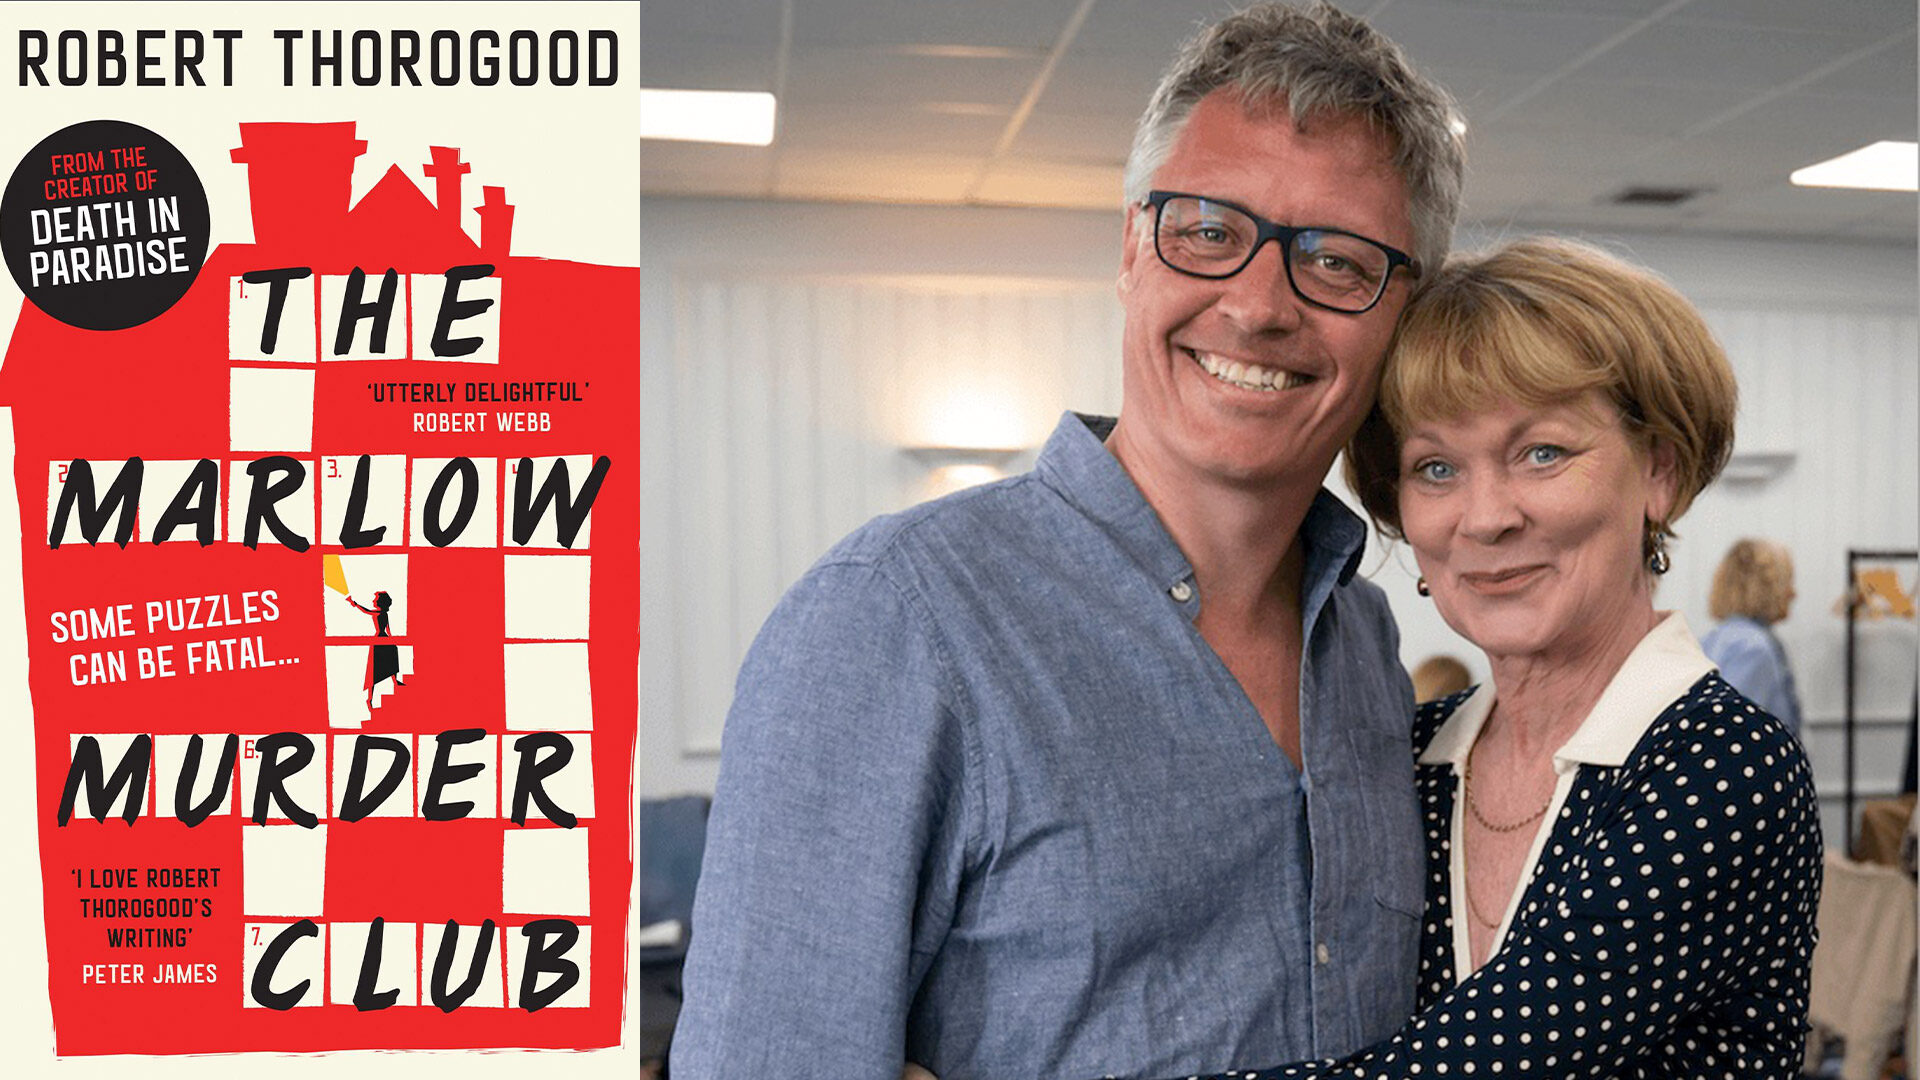 Cover of the mystery novel The Marlow Murder Club paired with a photo of the author Robert Thorogood and actor Samantha Bond.